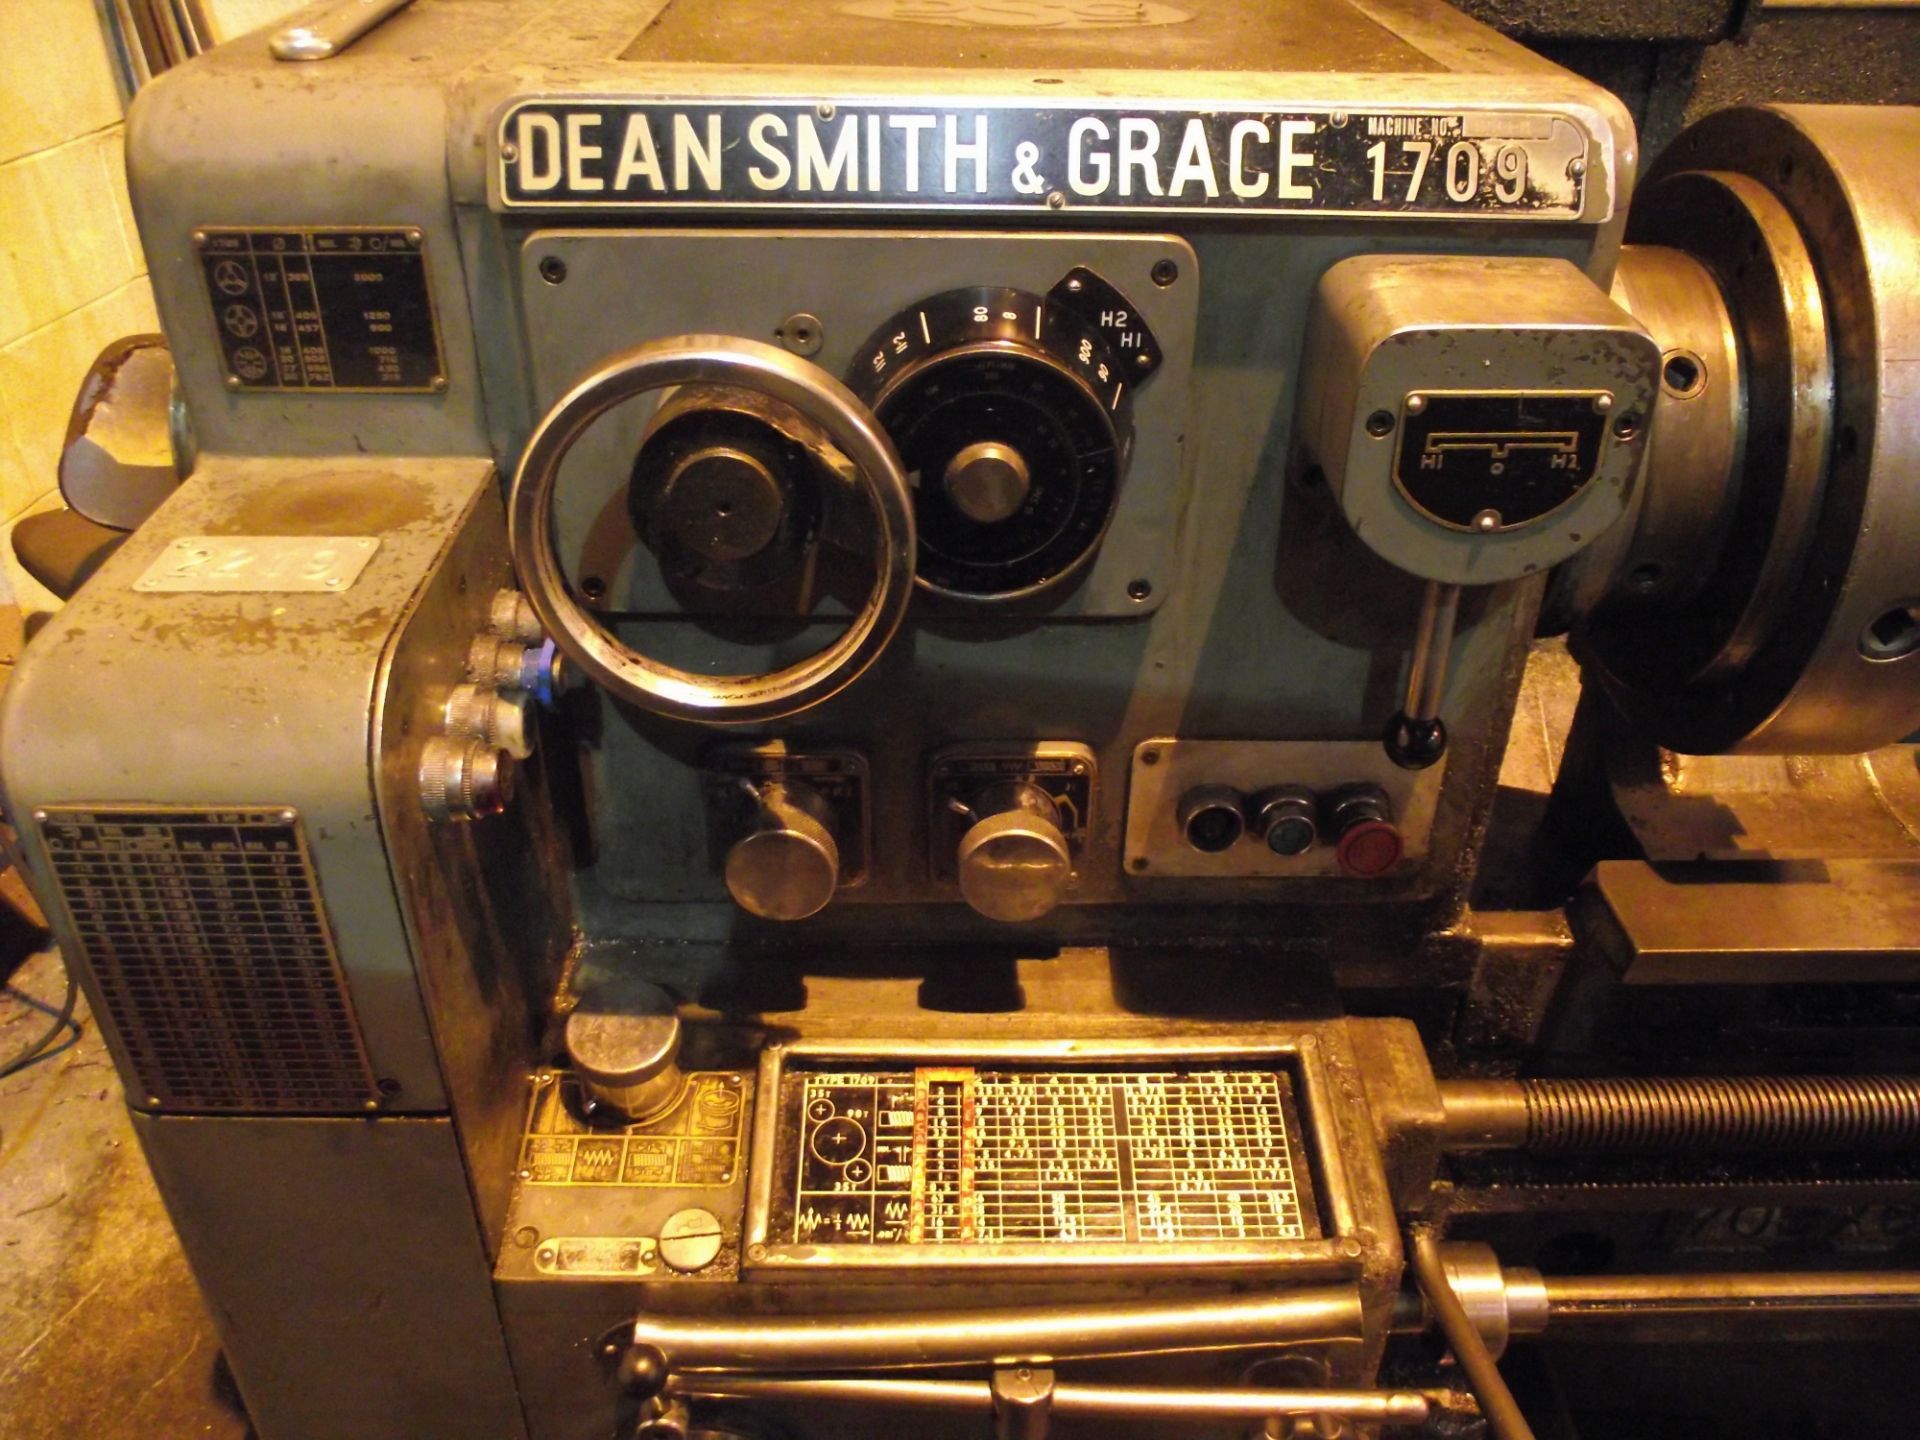 Dean Smith & Grace 1709-60 Gap Bed Lathe - Image 2 of 18